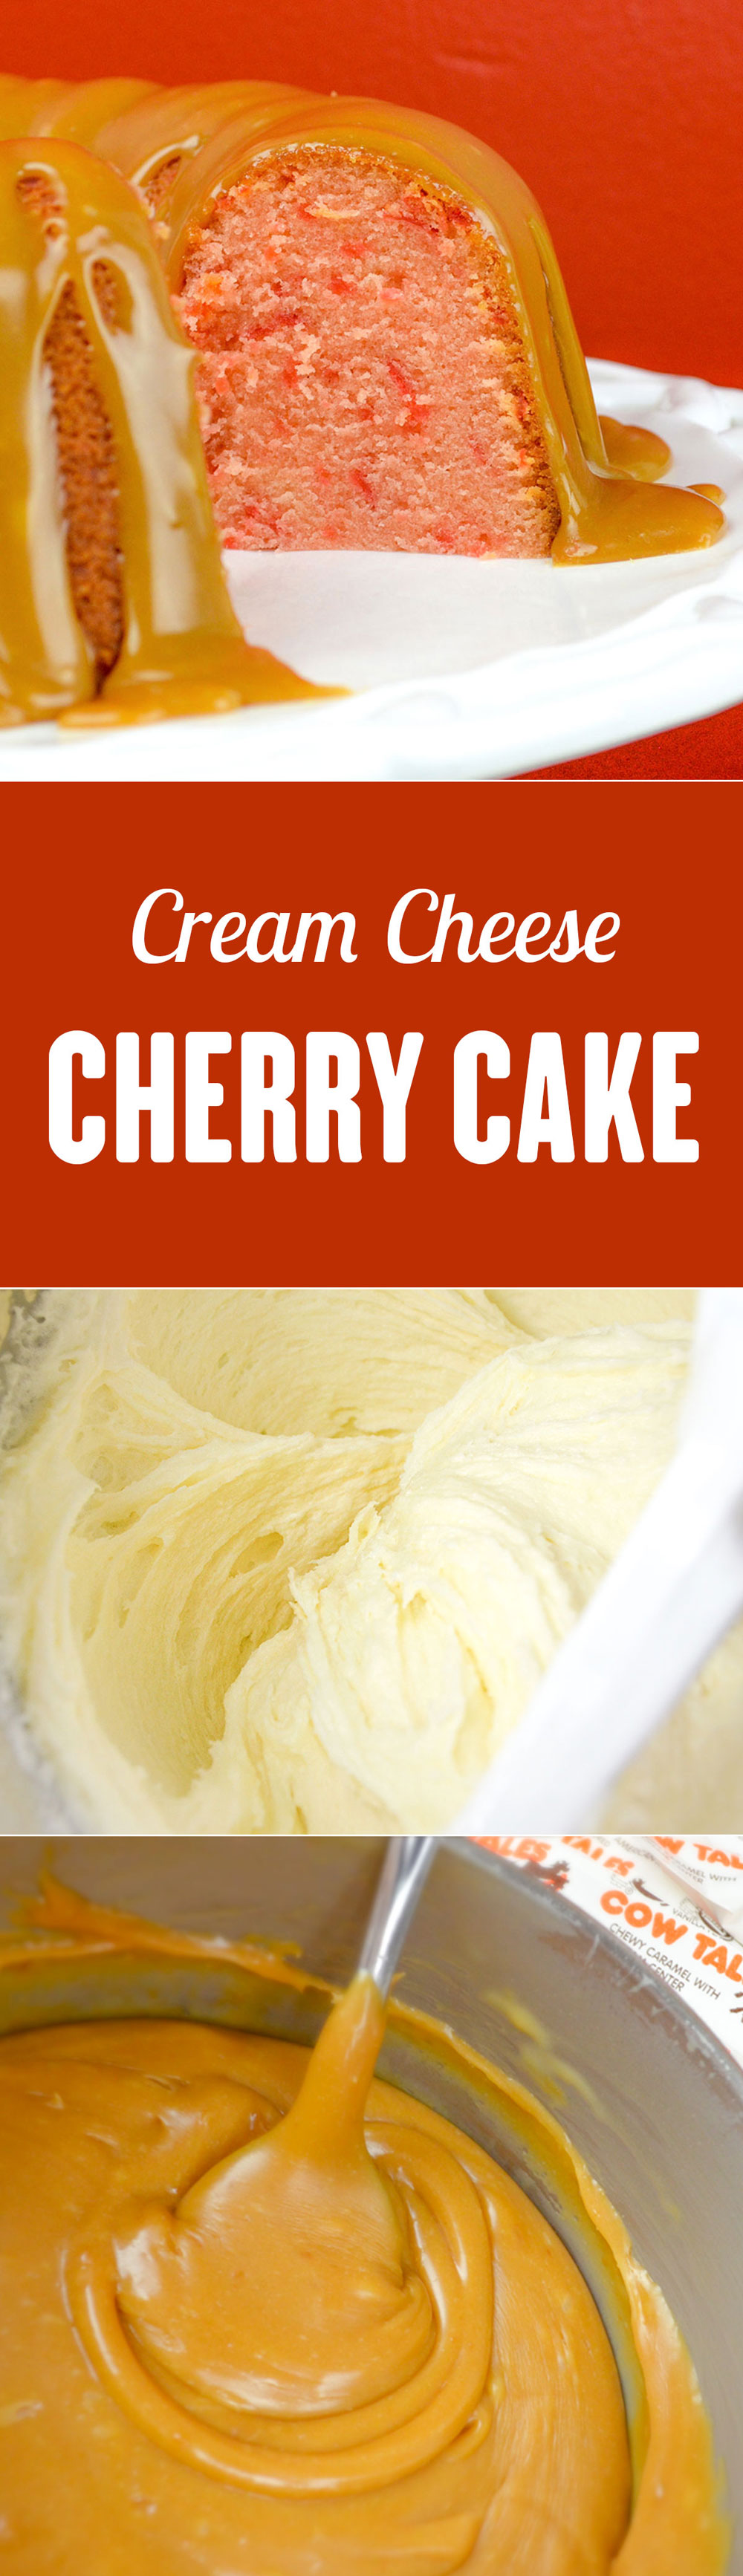 Delicious! Moist! Cherry Cream Cheese Pound Cake Recipe - Topped With Caramel Sauce Made with Caramel Cow Tales.